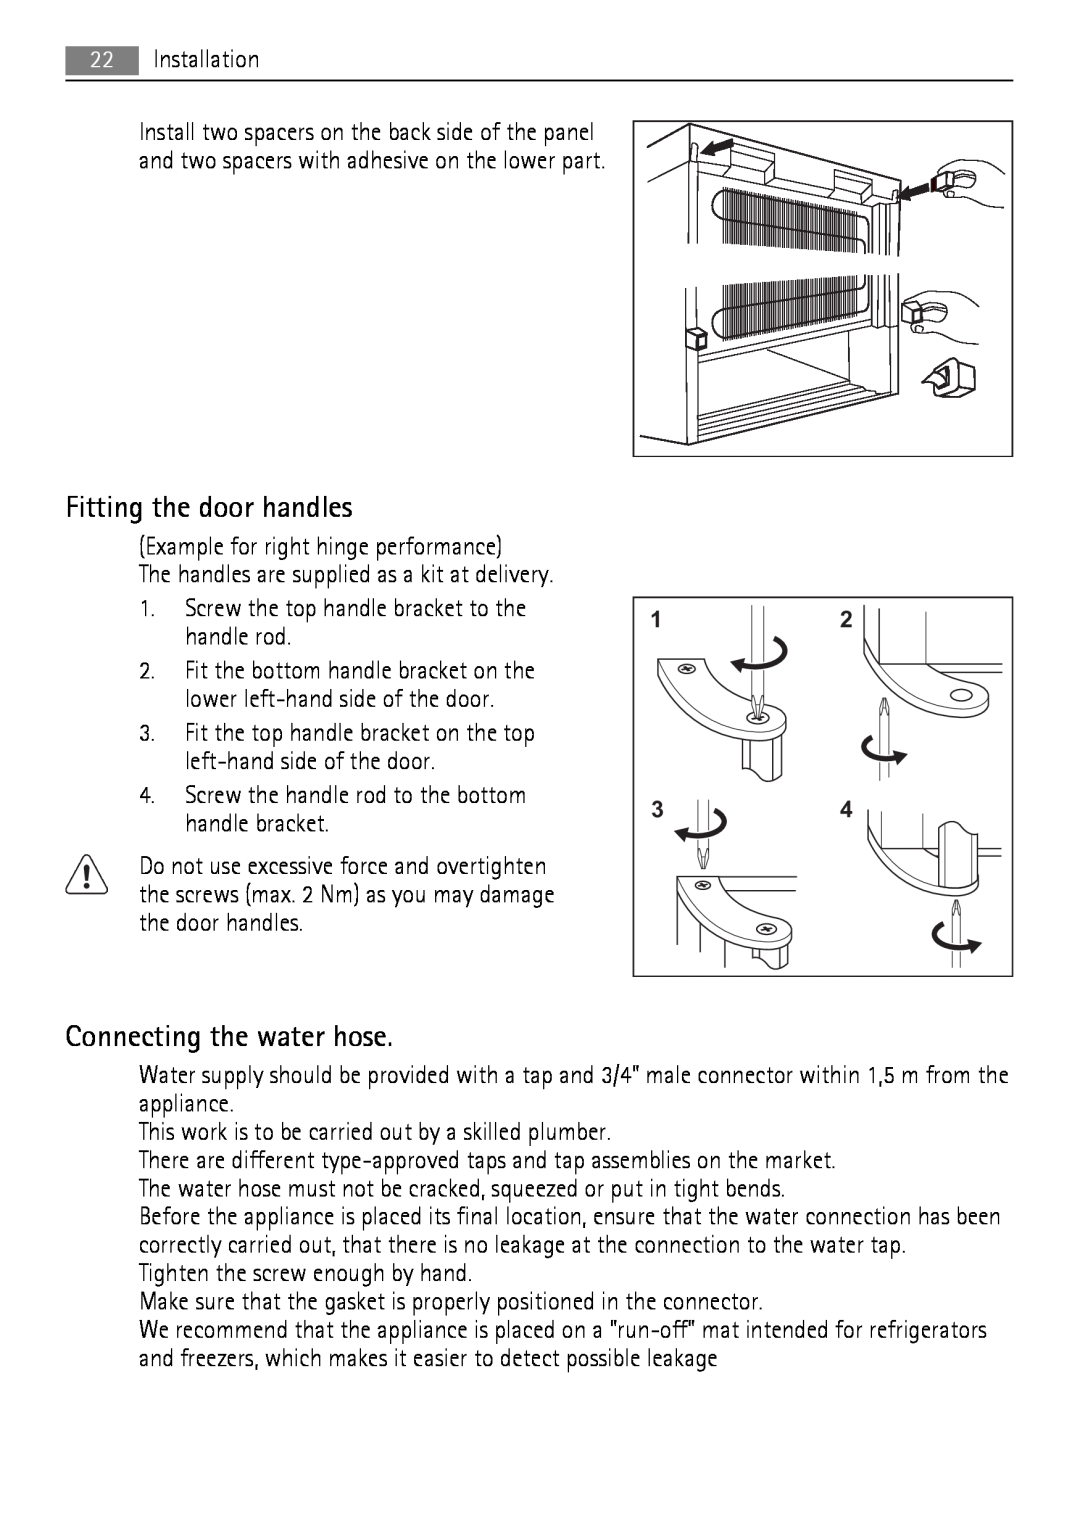 AEG A92860GNX0 user manual Fitting the door handles, Connecting the water hose 